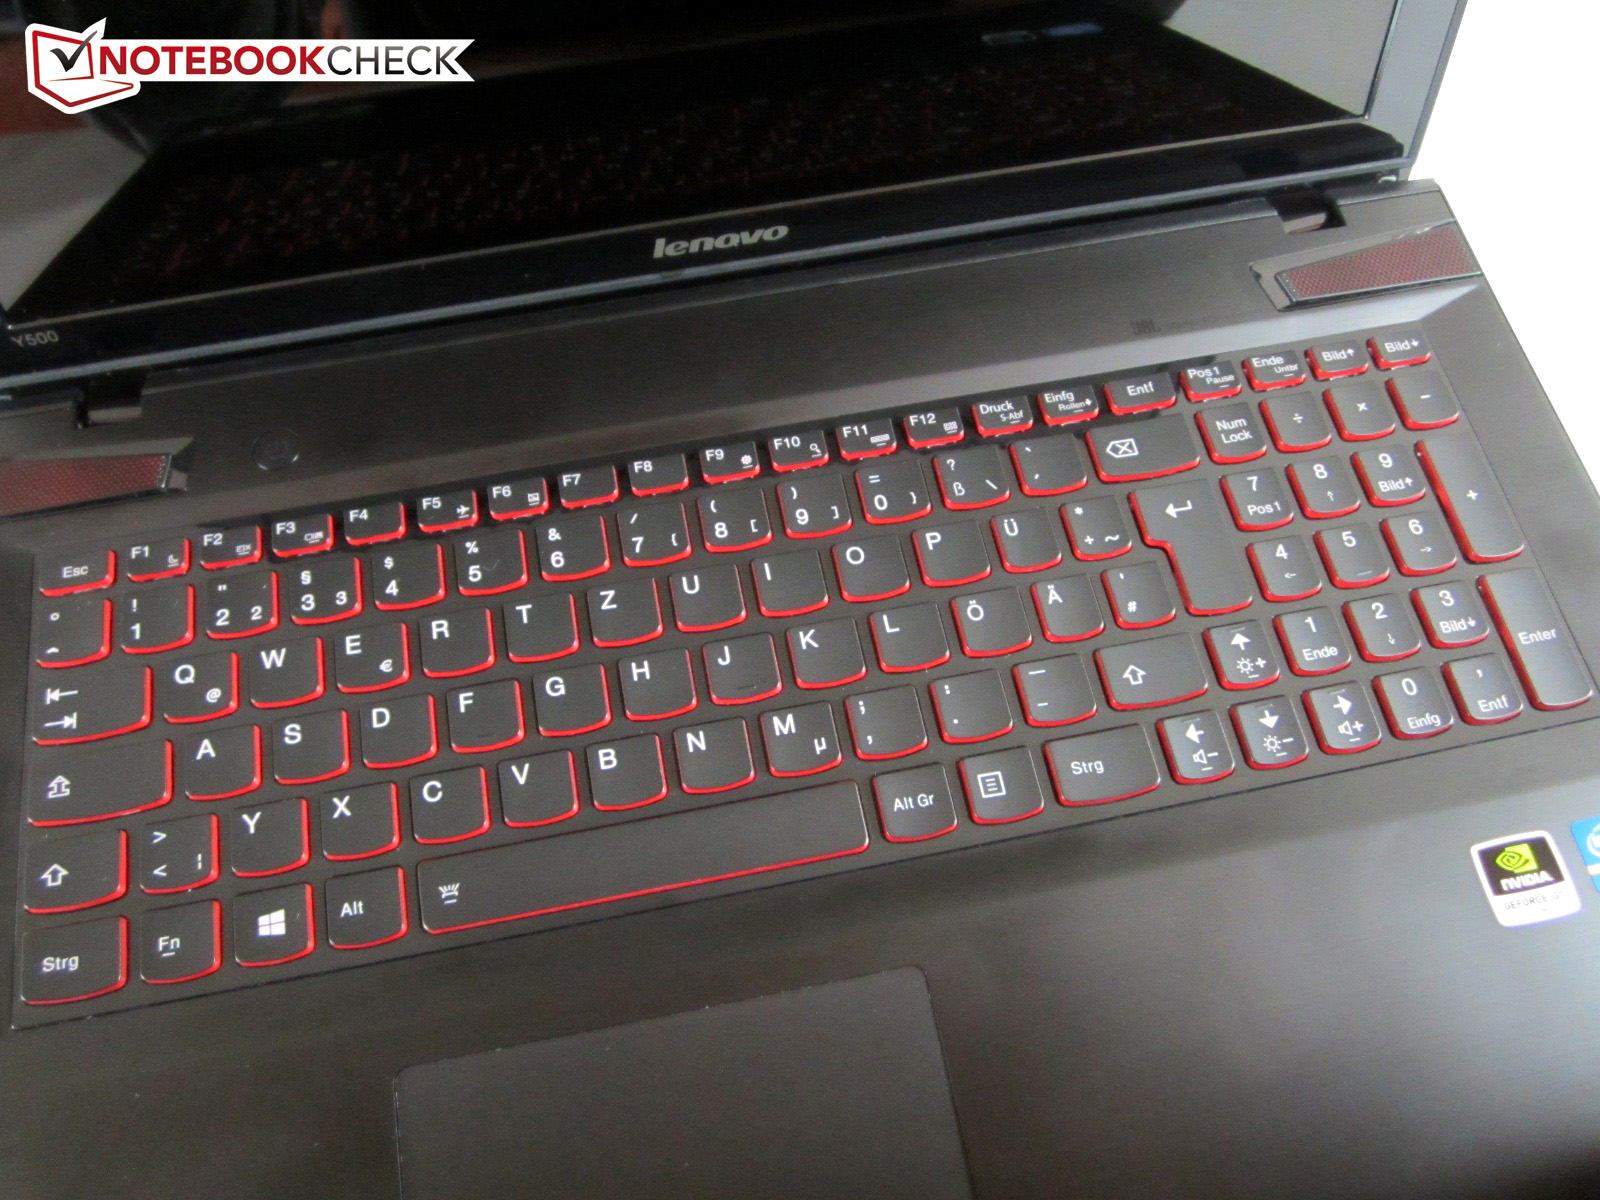 Lenovo Ideapad Y500 Serie Notebookcheck Externe Tests